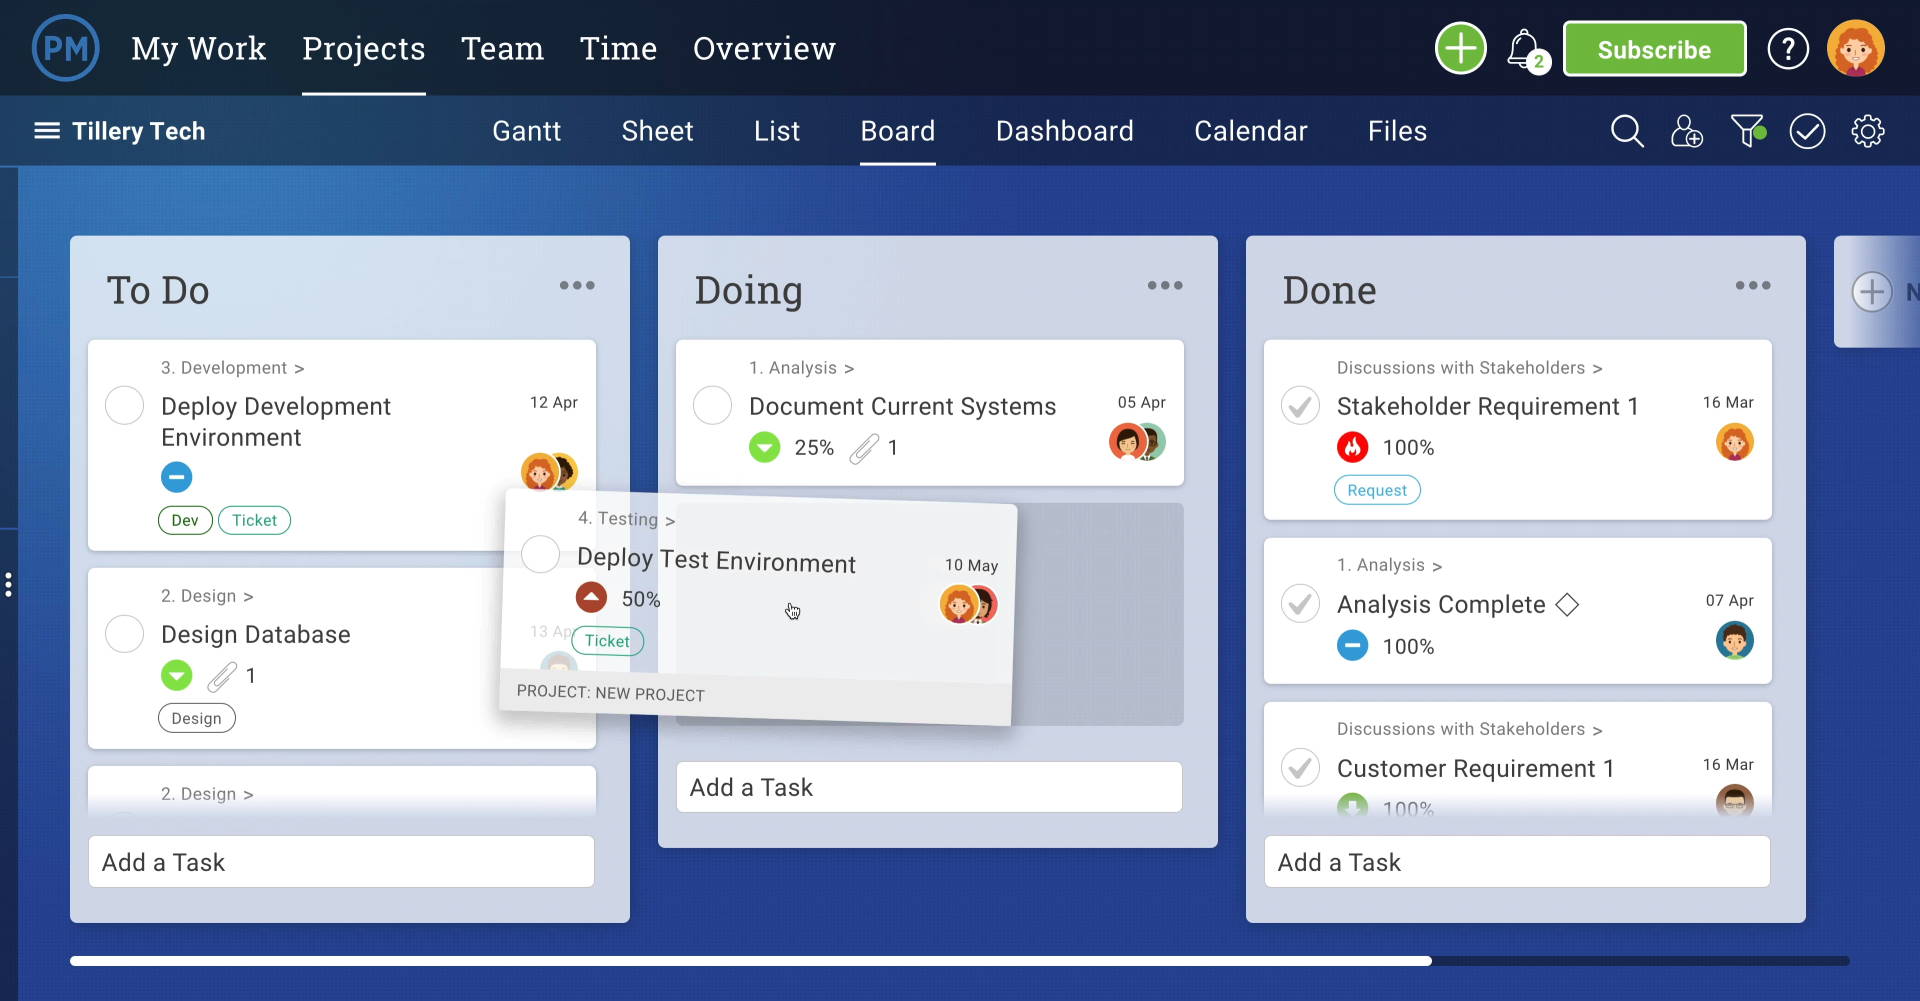 ProjectManager's kanban project view